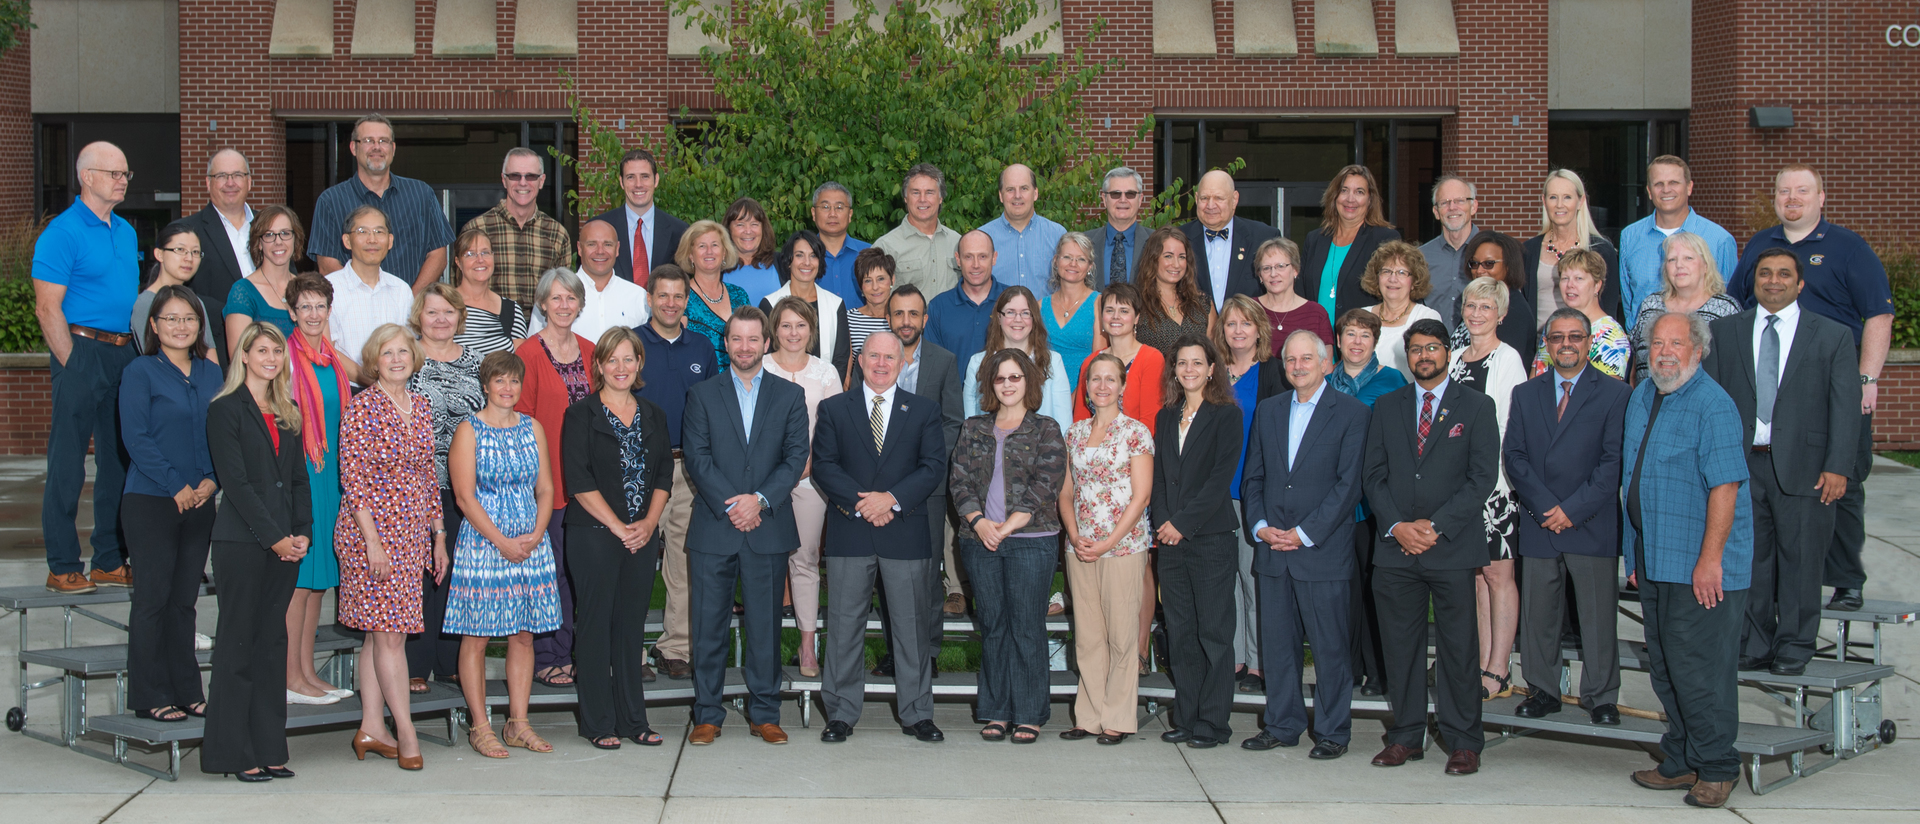 50th anniversary faculty and staff